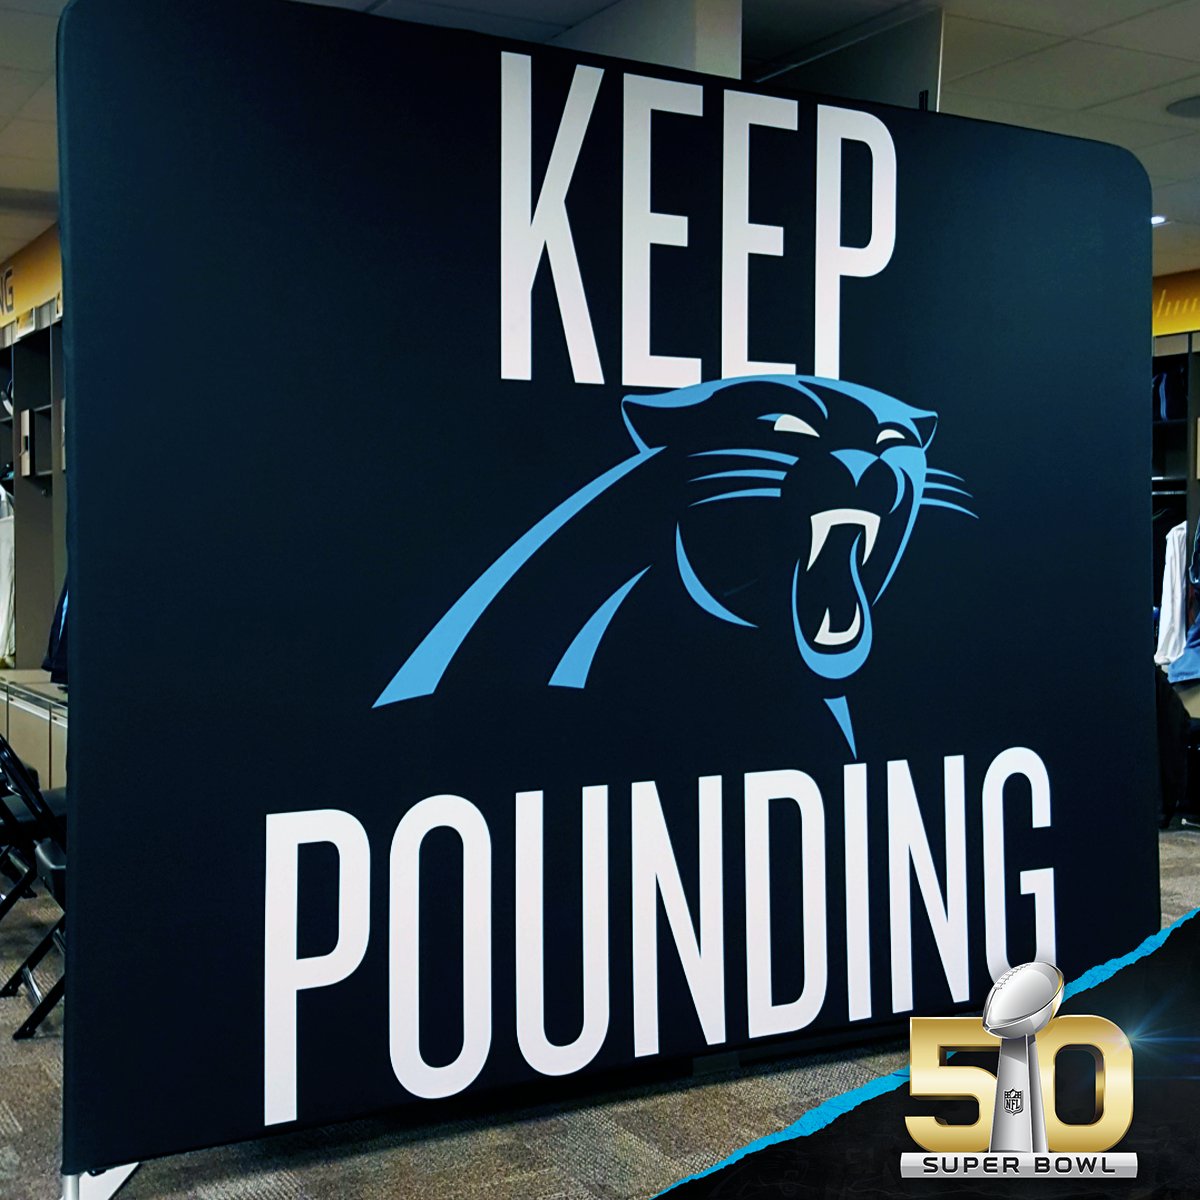 Carolina Panthers on Twitter: "This sign sits in the #Panthers locker